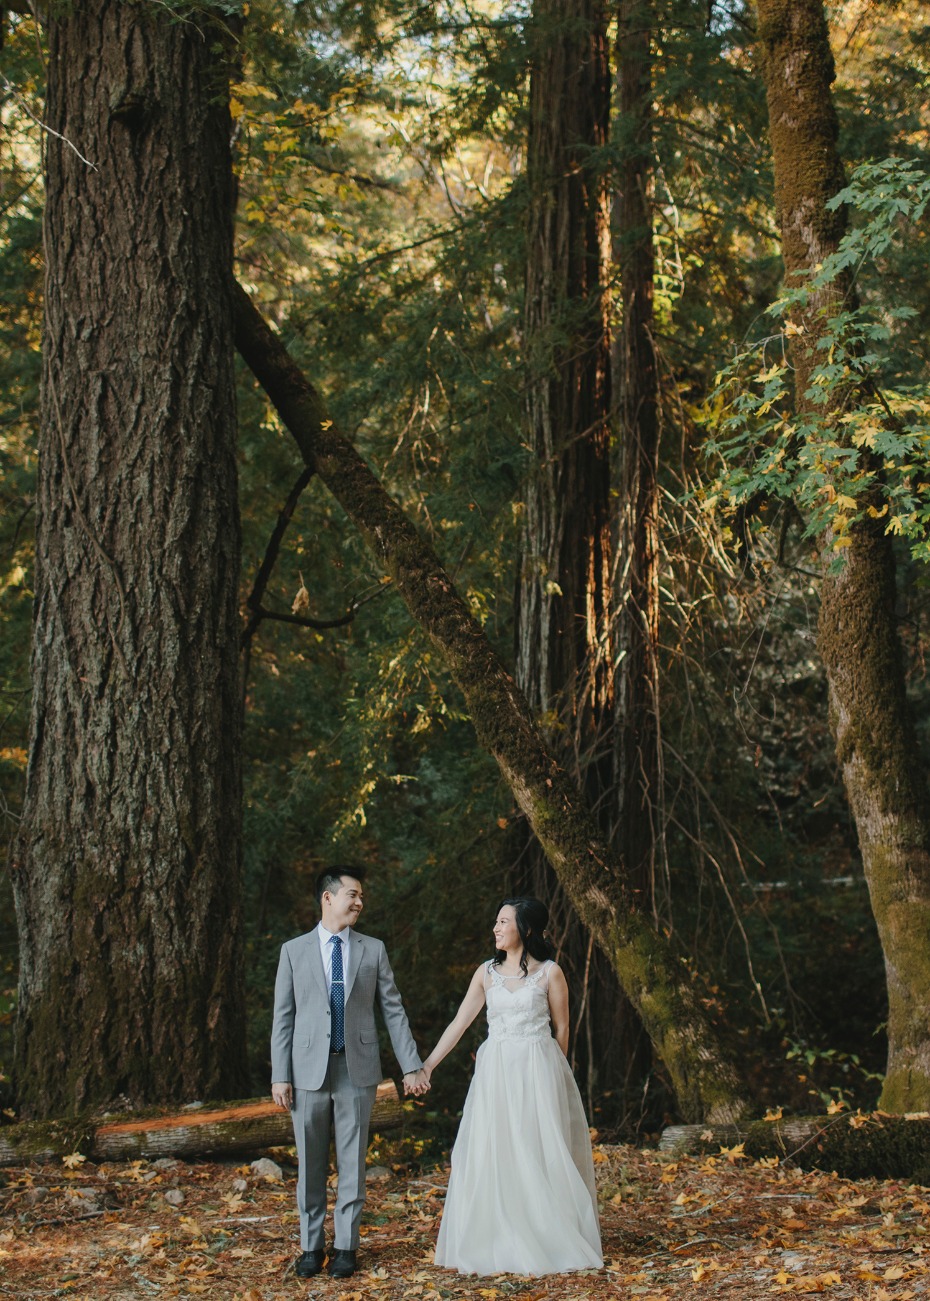 Take wedding pictures in the woods